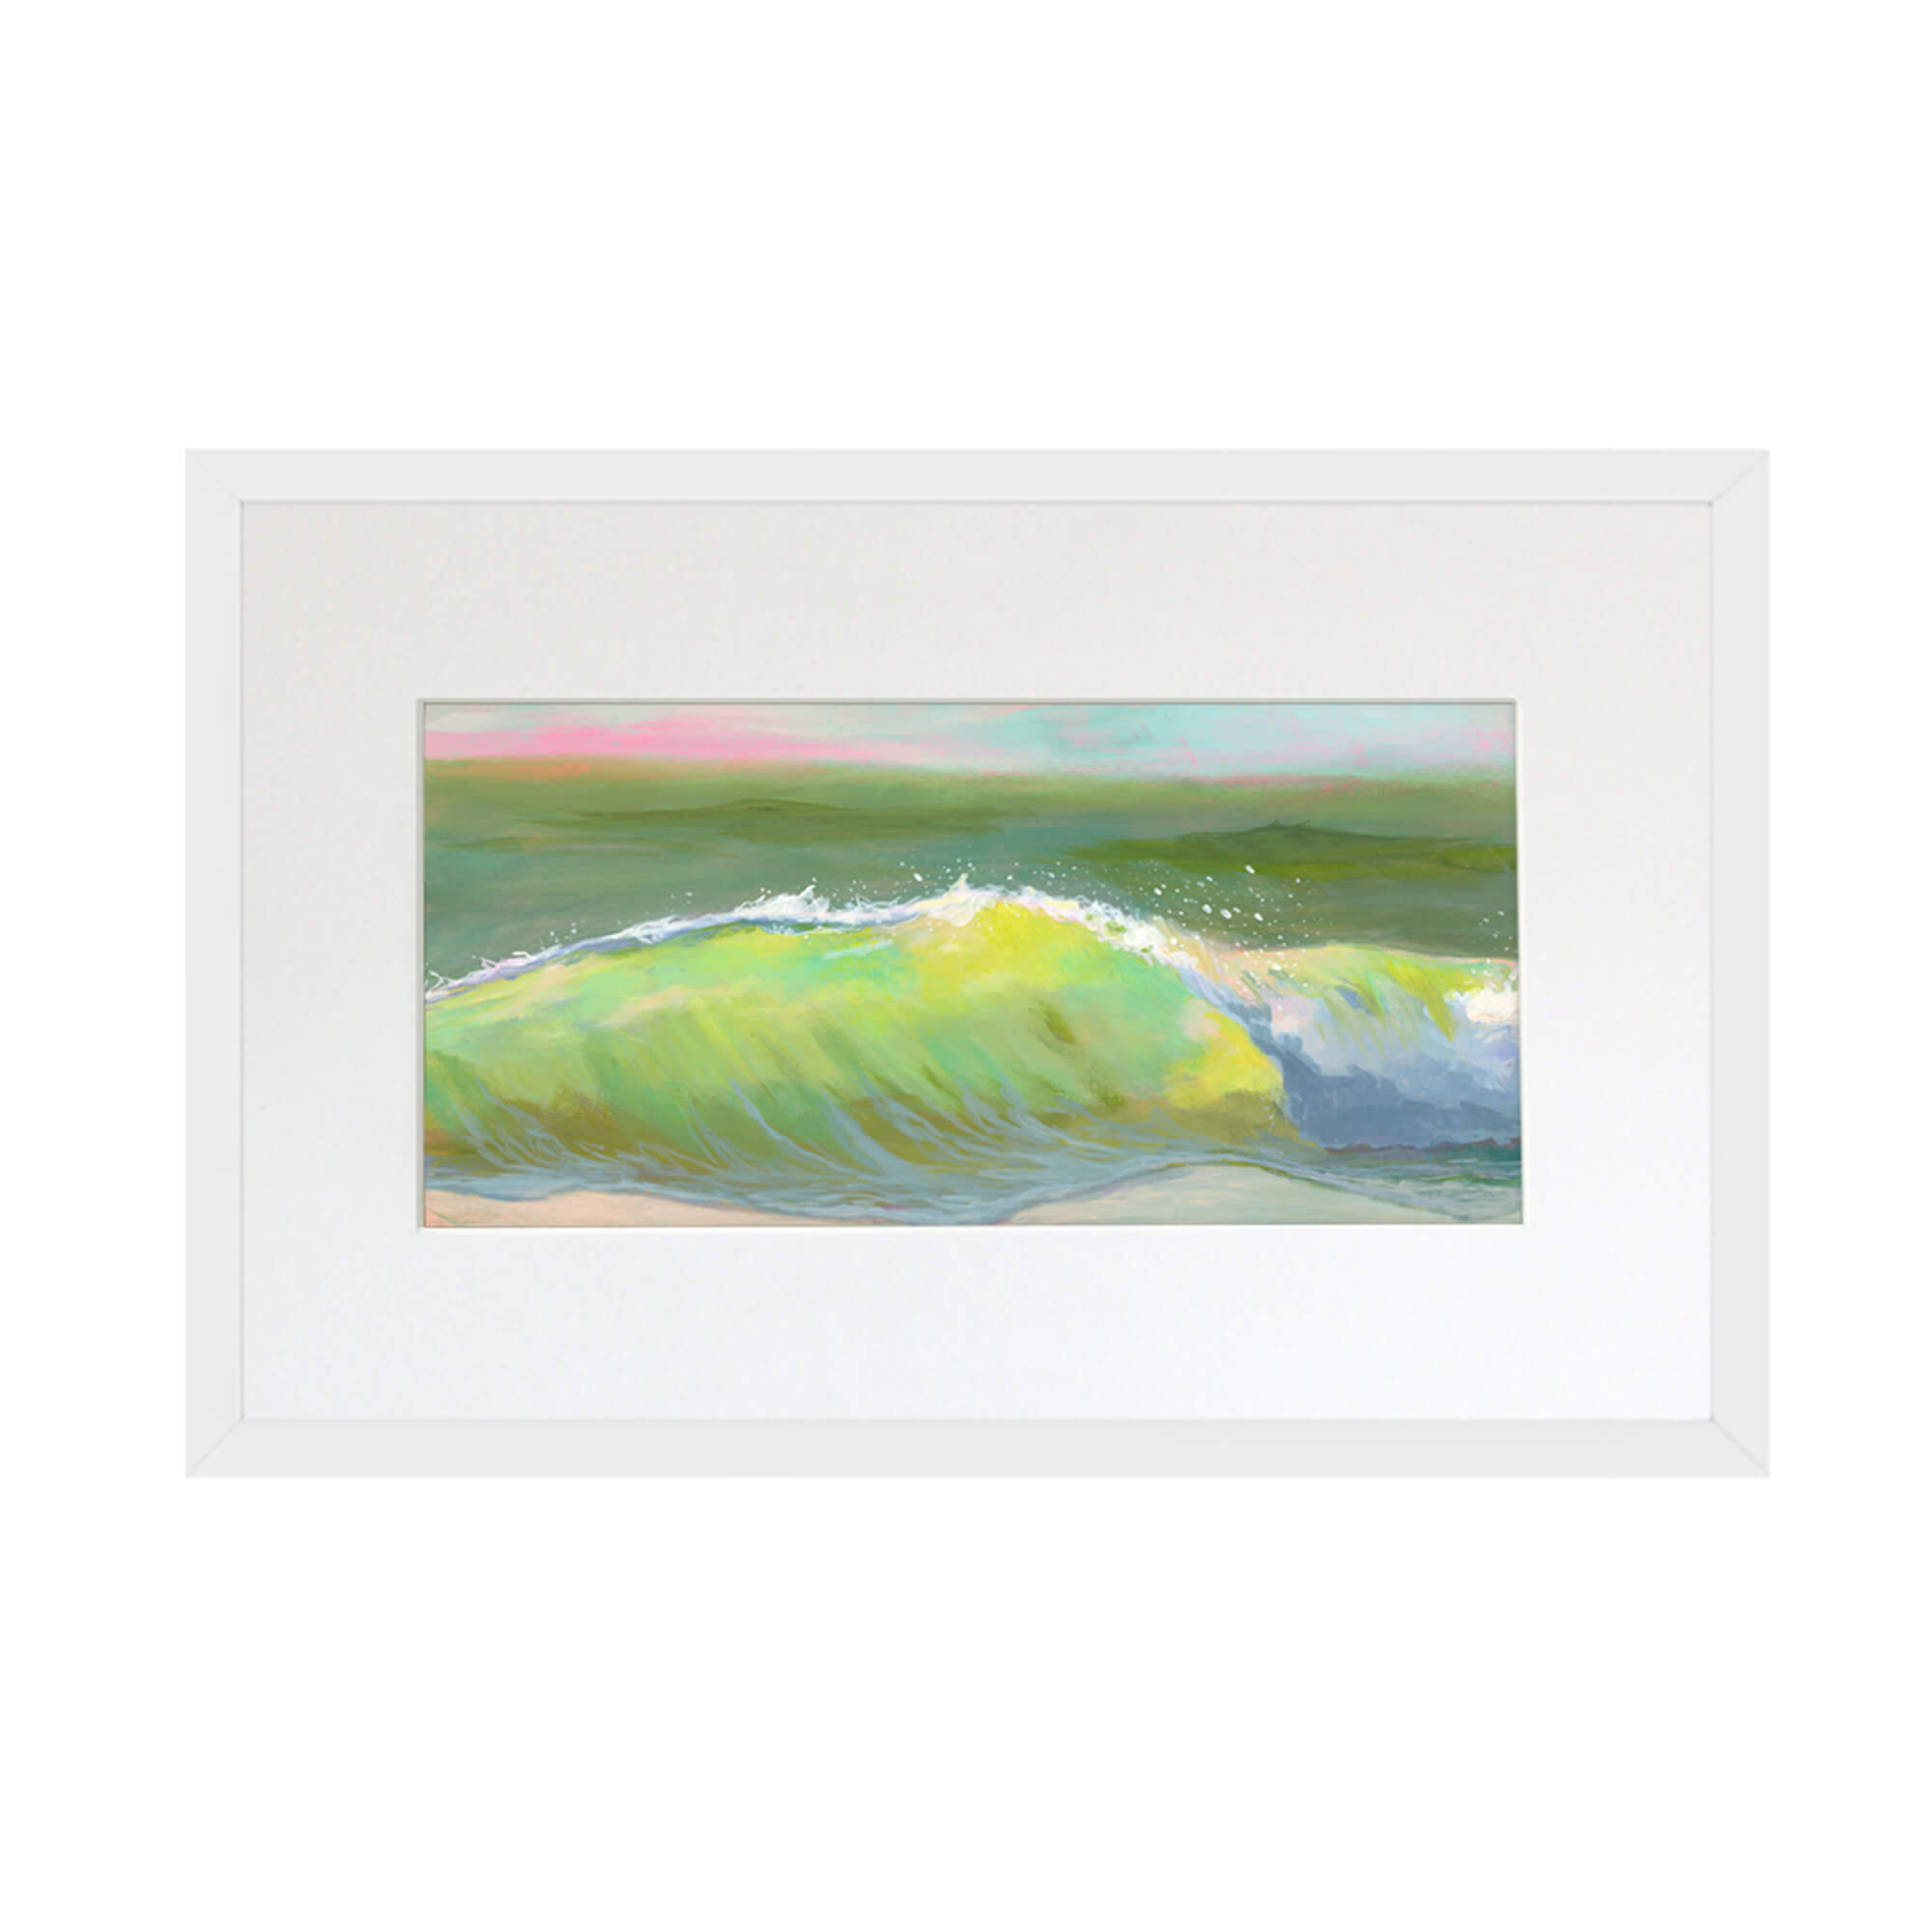 A perfect barrel wave with different shades of green by Hawaii artist Lindsay Wilkins